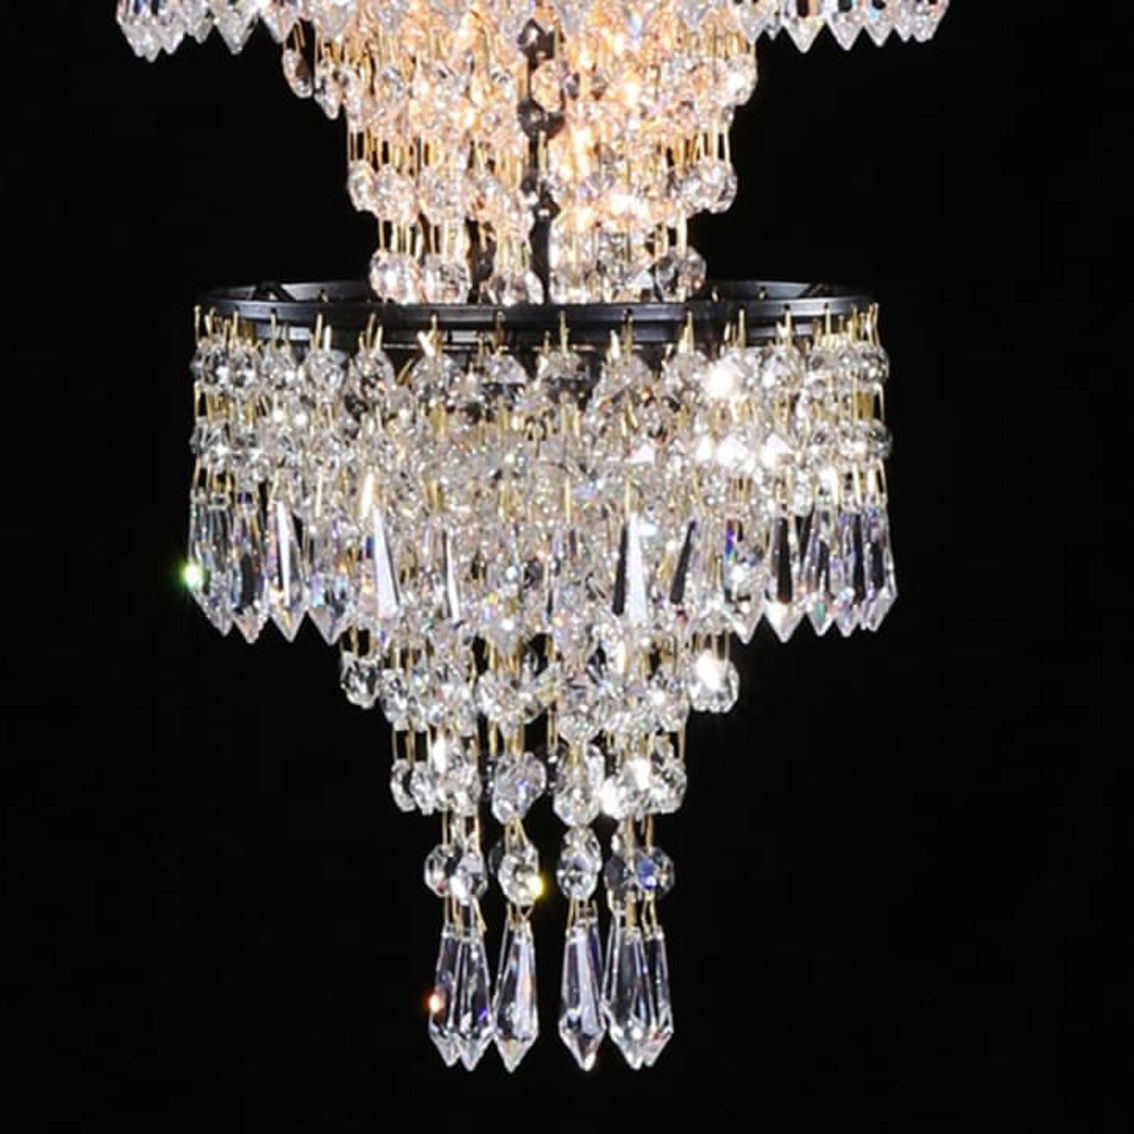 Manor Luxe, Tier Antique Style Glass Crystal Chandelier w/ Edison Bulb Pendant - Image 2 of 2